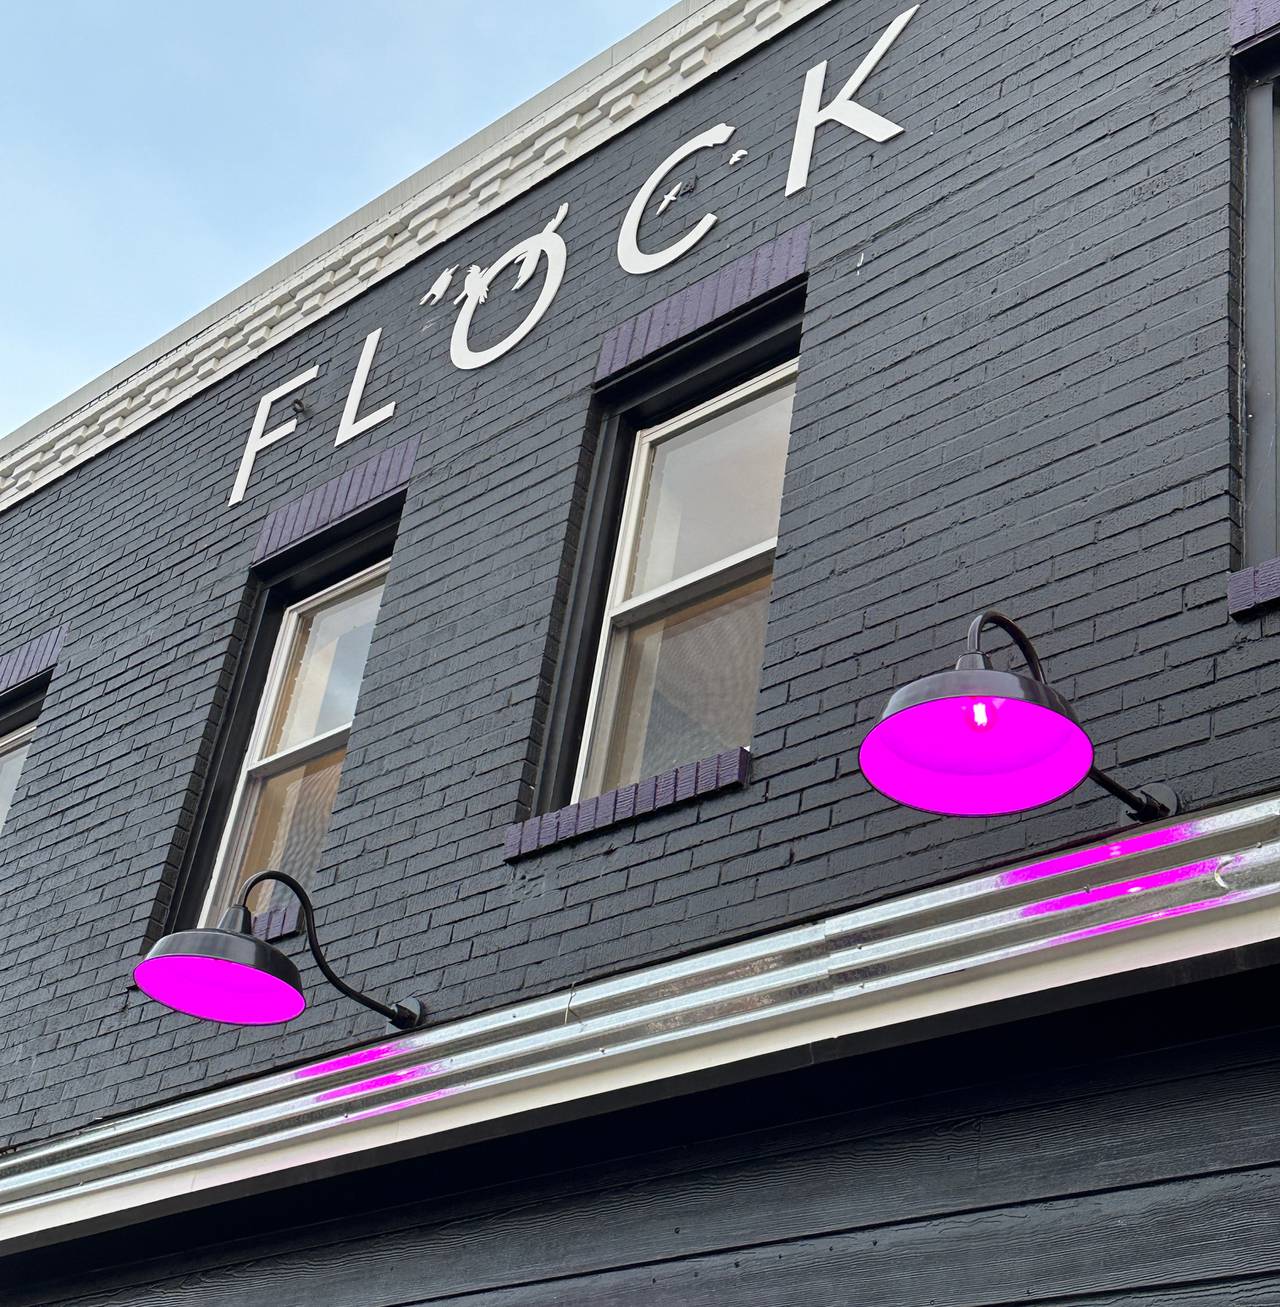 Flock is a new sports bar and restaurant in Pigtown.